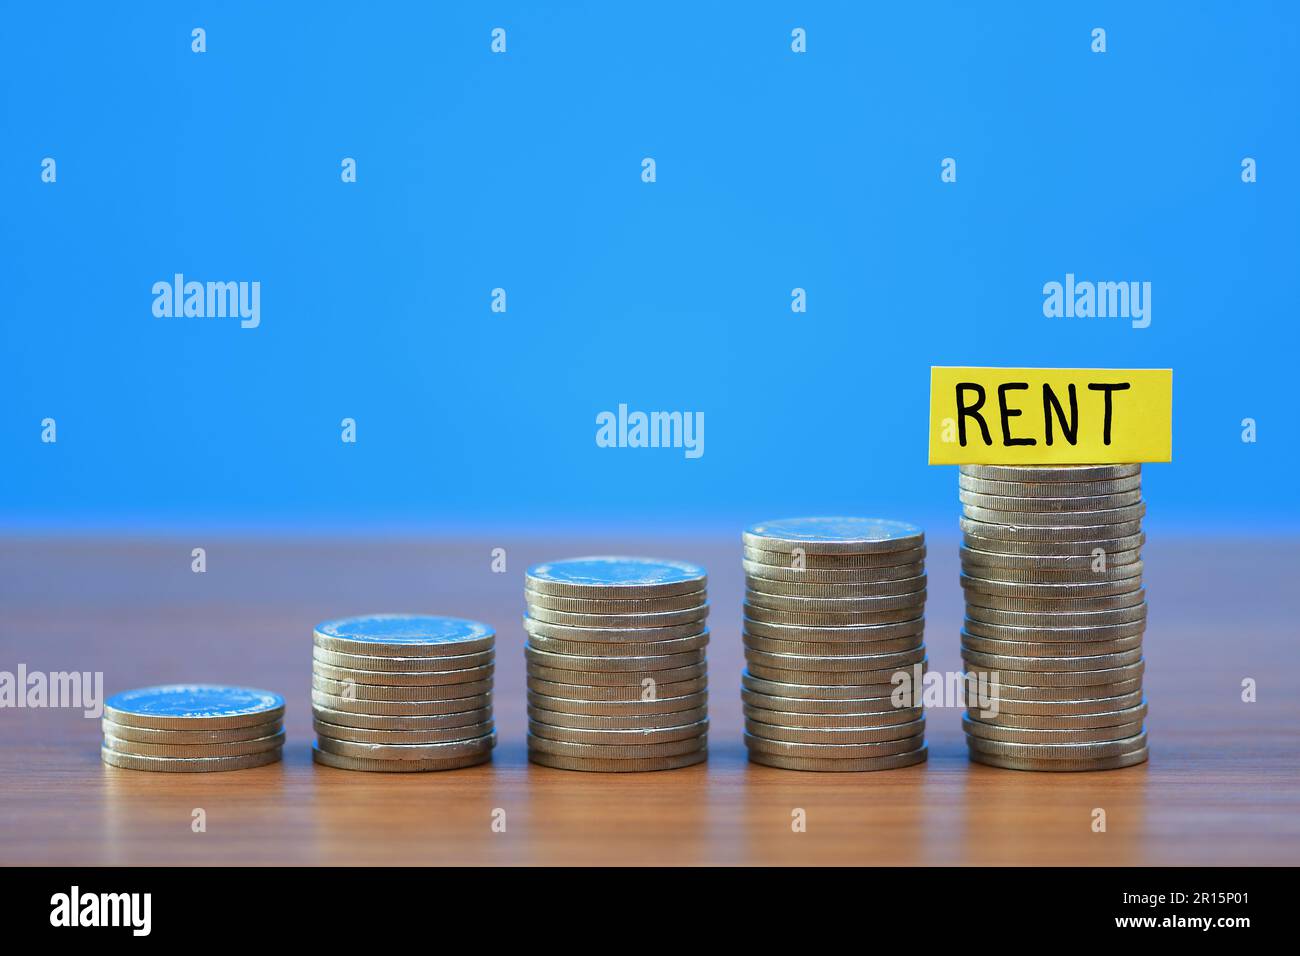 A row of a growing stack of coins illustrating the increasing cost of household Rent due to the rising cost of living, on a blue background Stock Photo